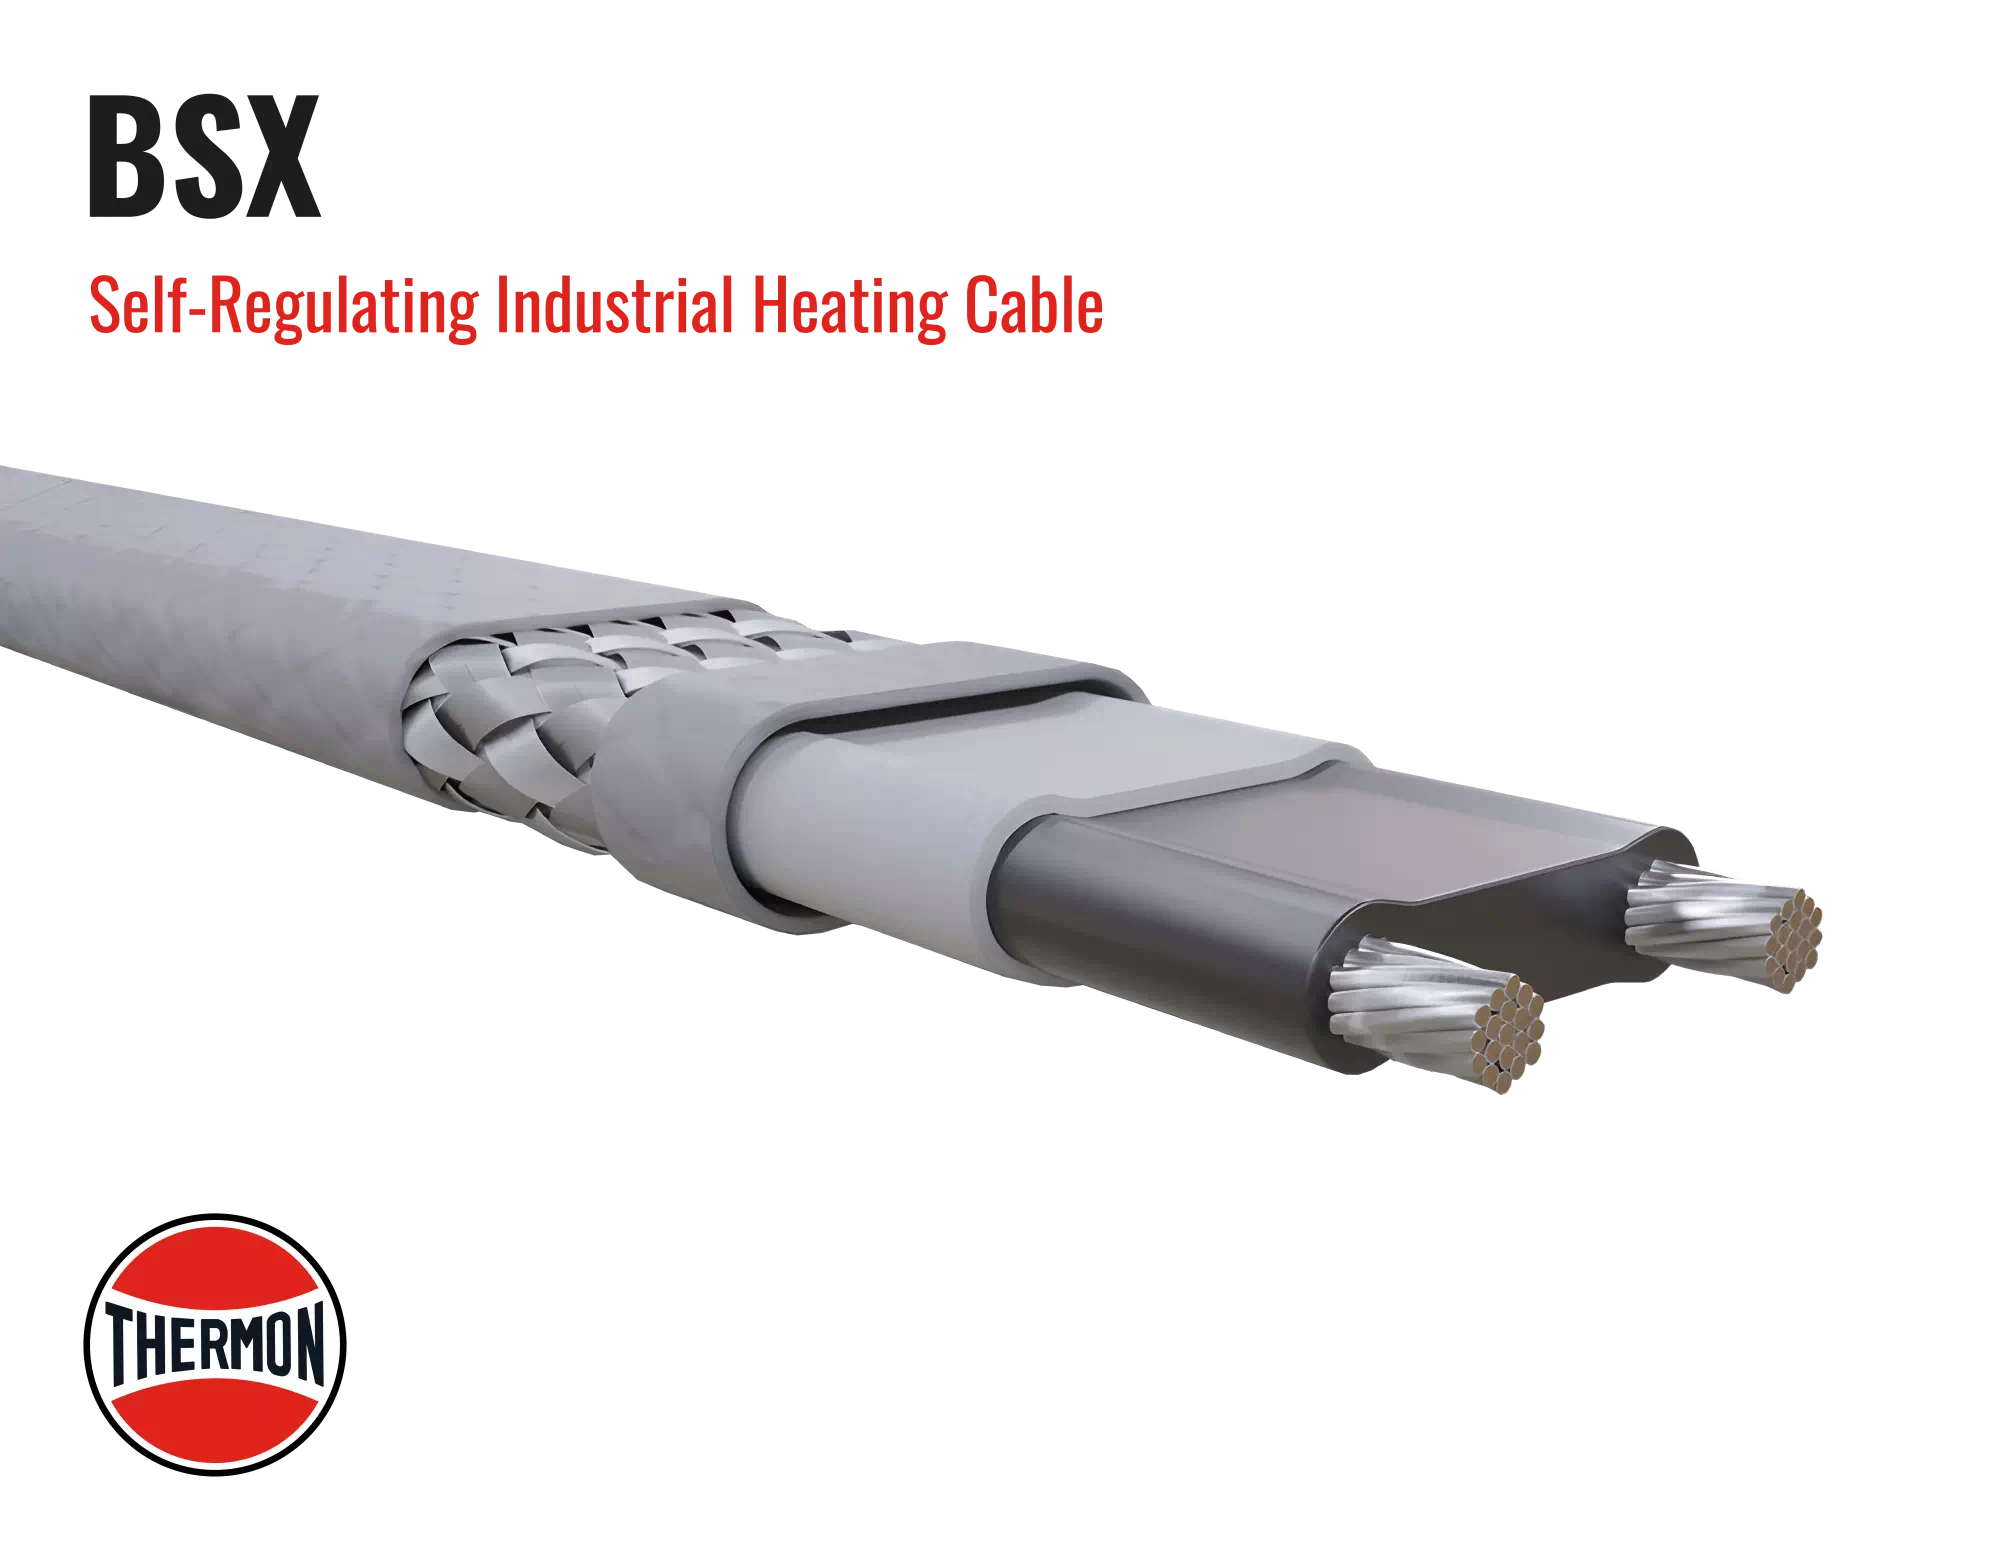 Thermon BSX-Self-Regulating-Heat-Cable